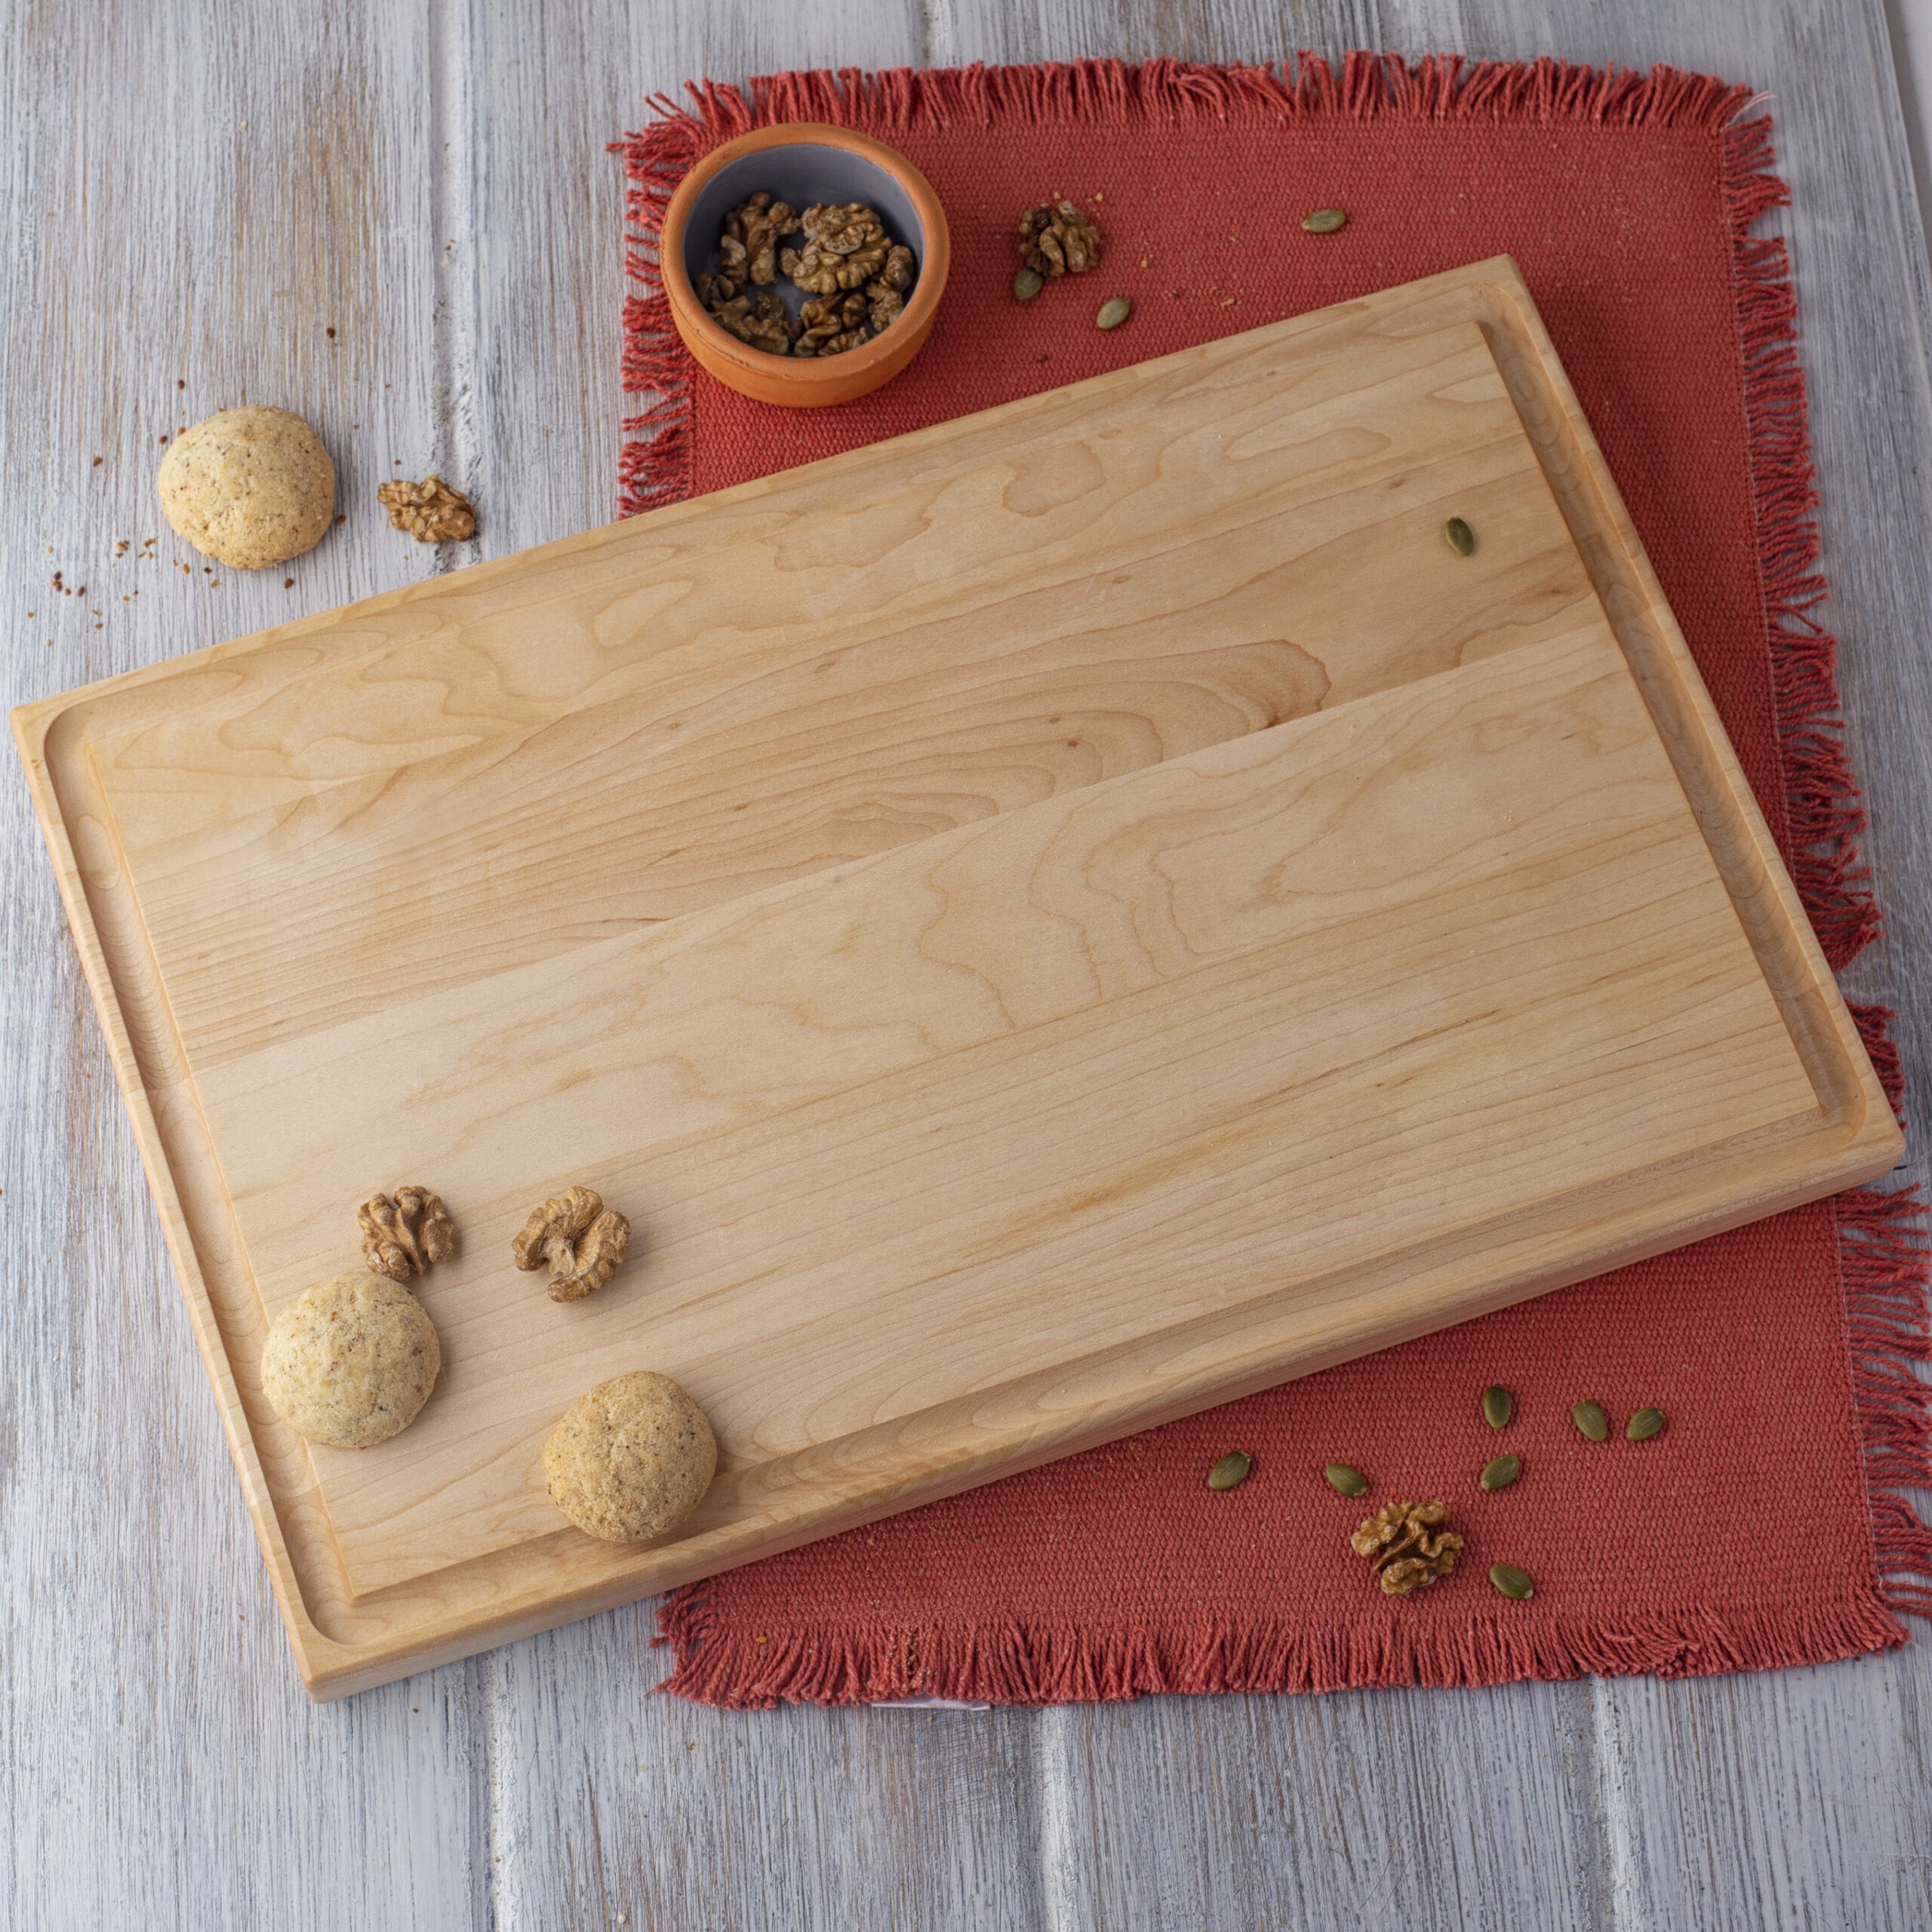 Large Maple Cutting Board (17x11) with Juice Groove - Forest Decor